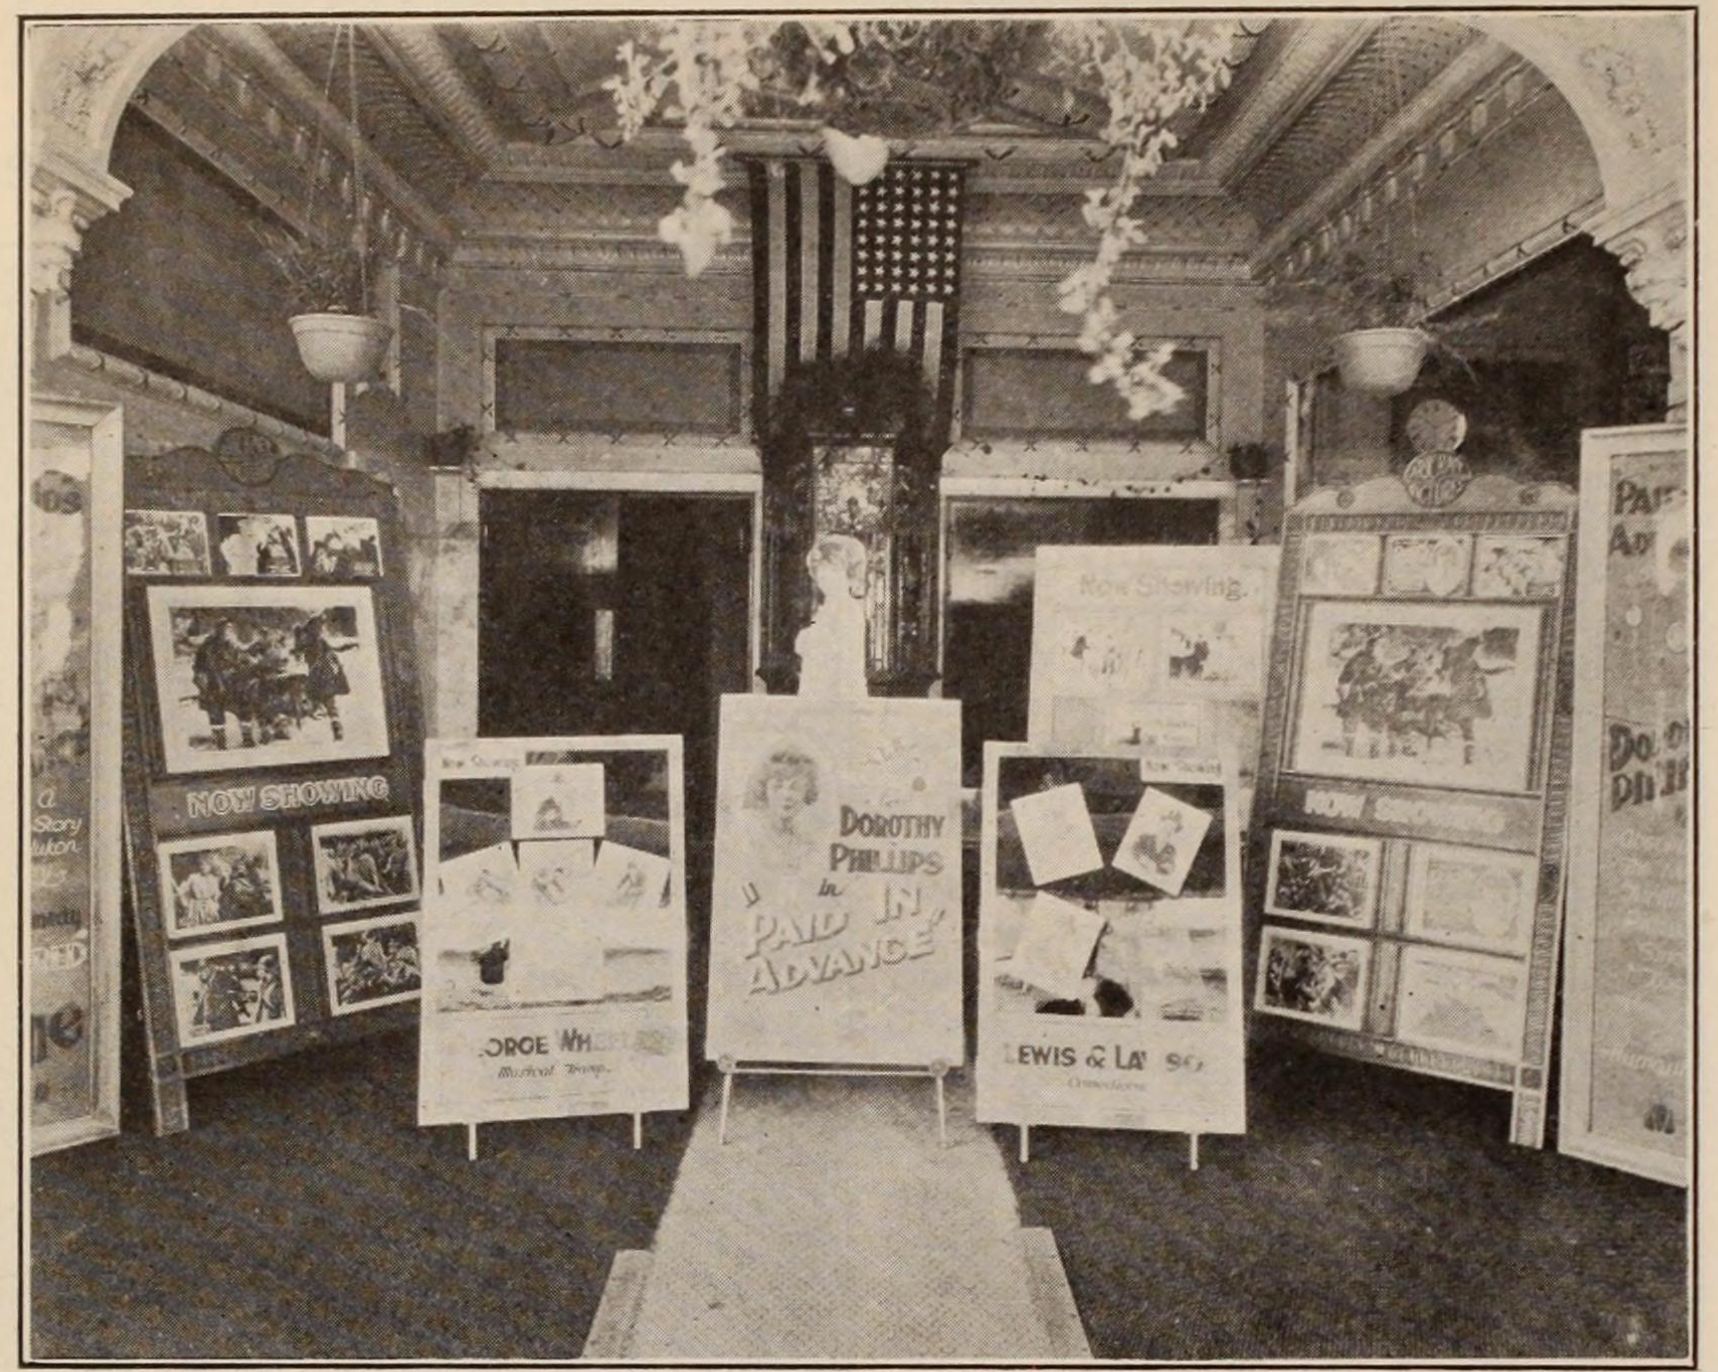 Promotional strategies in front of the Oregon theater, 1919